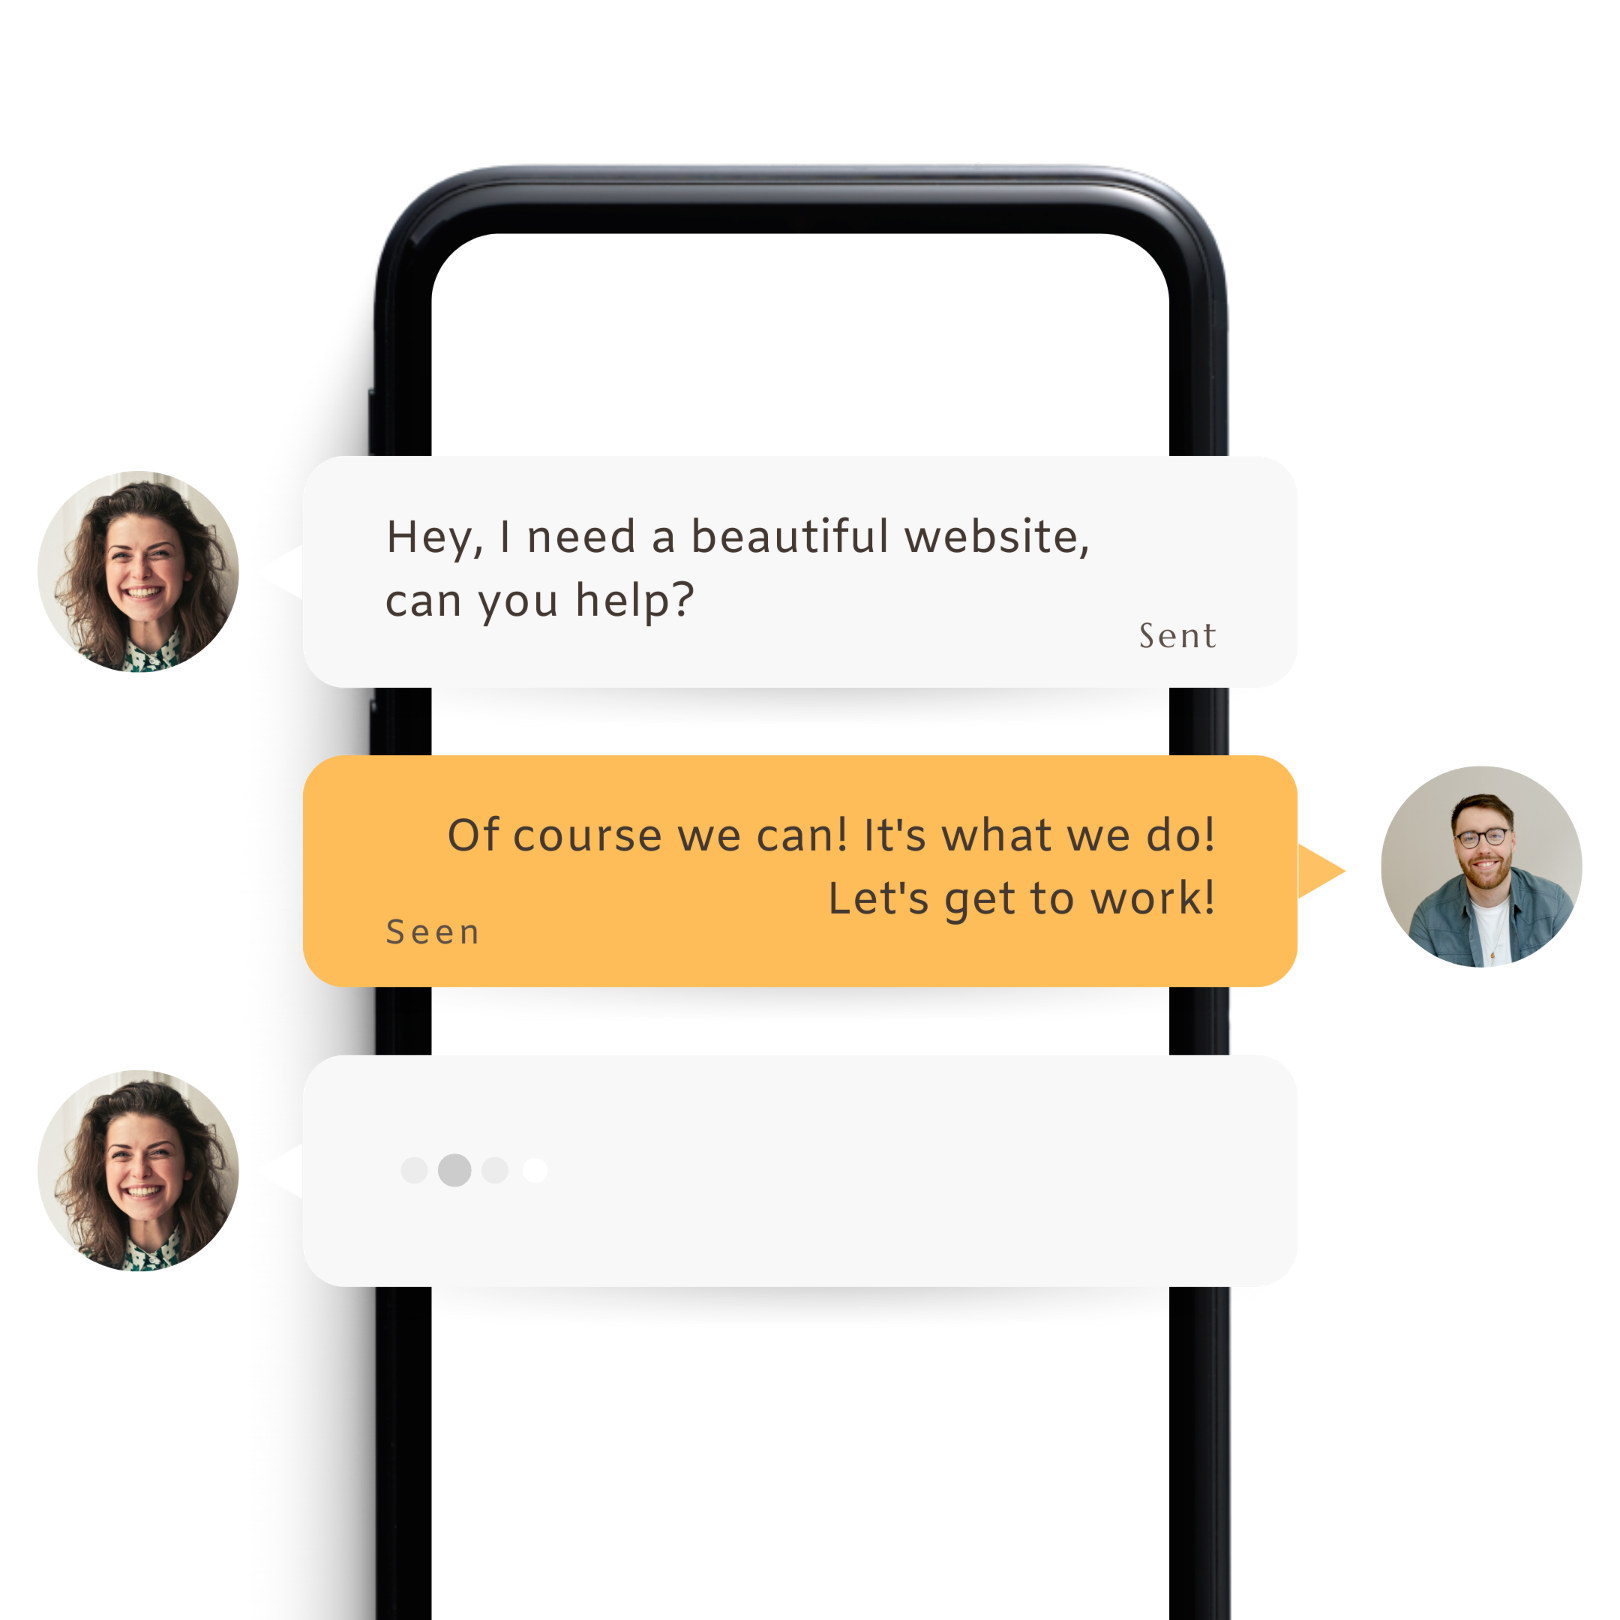 Mockup of a text conversation with yellow and grey speech bubbles a woman with curly hair on one side and a bearded man on the other both in small circles